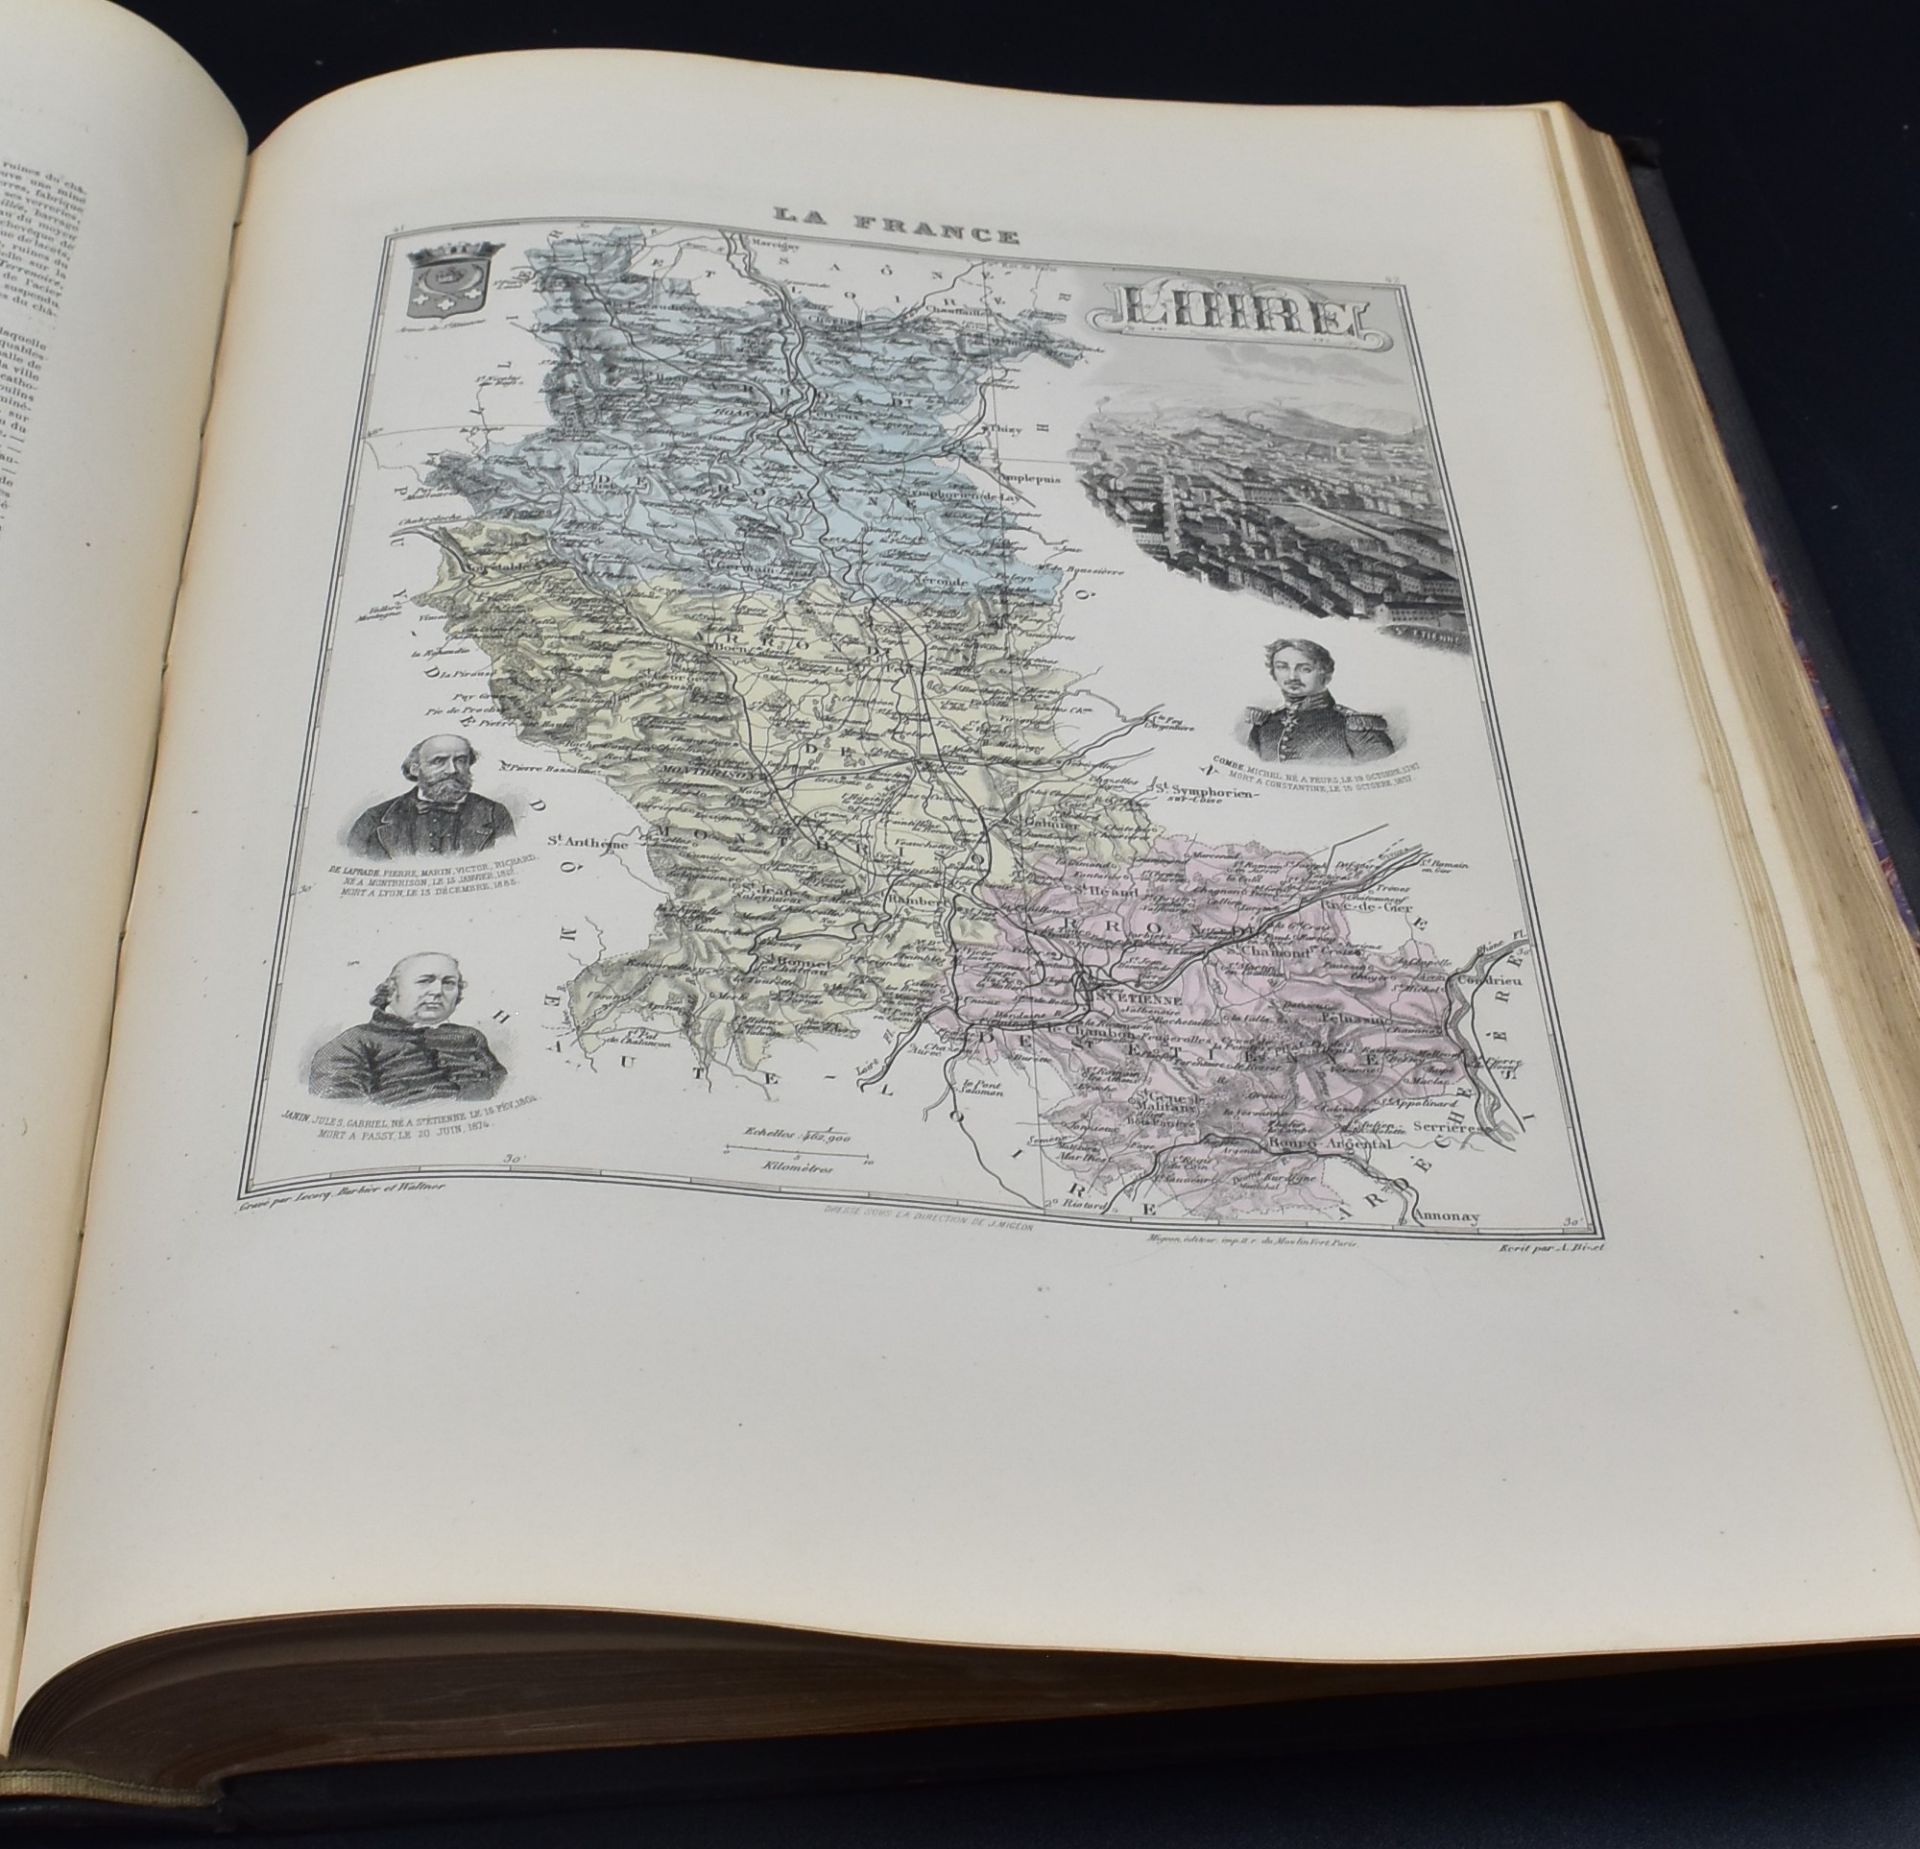 New illustrated atlas of France and its colonies. MM Vuillemin, Thuillier, Ch Lacoste, Lorsignol. Pa - Image 6 of 7